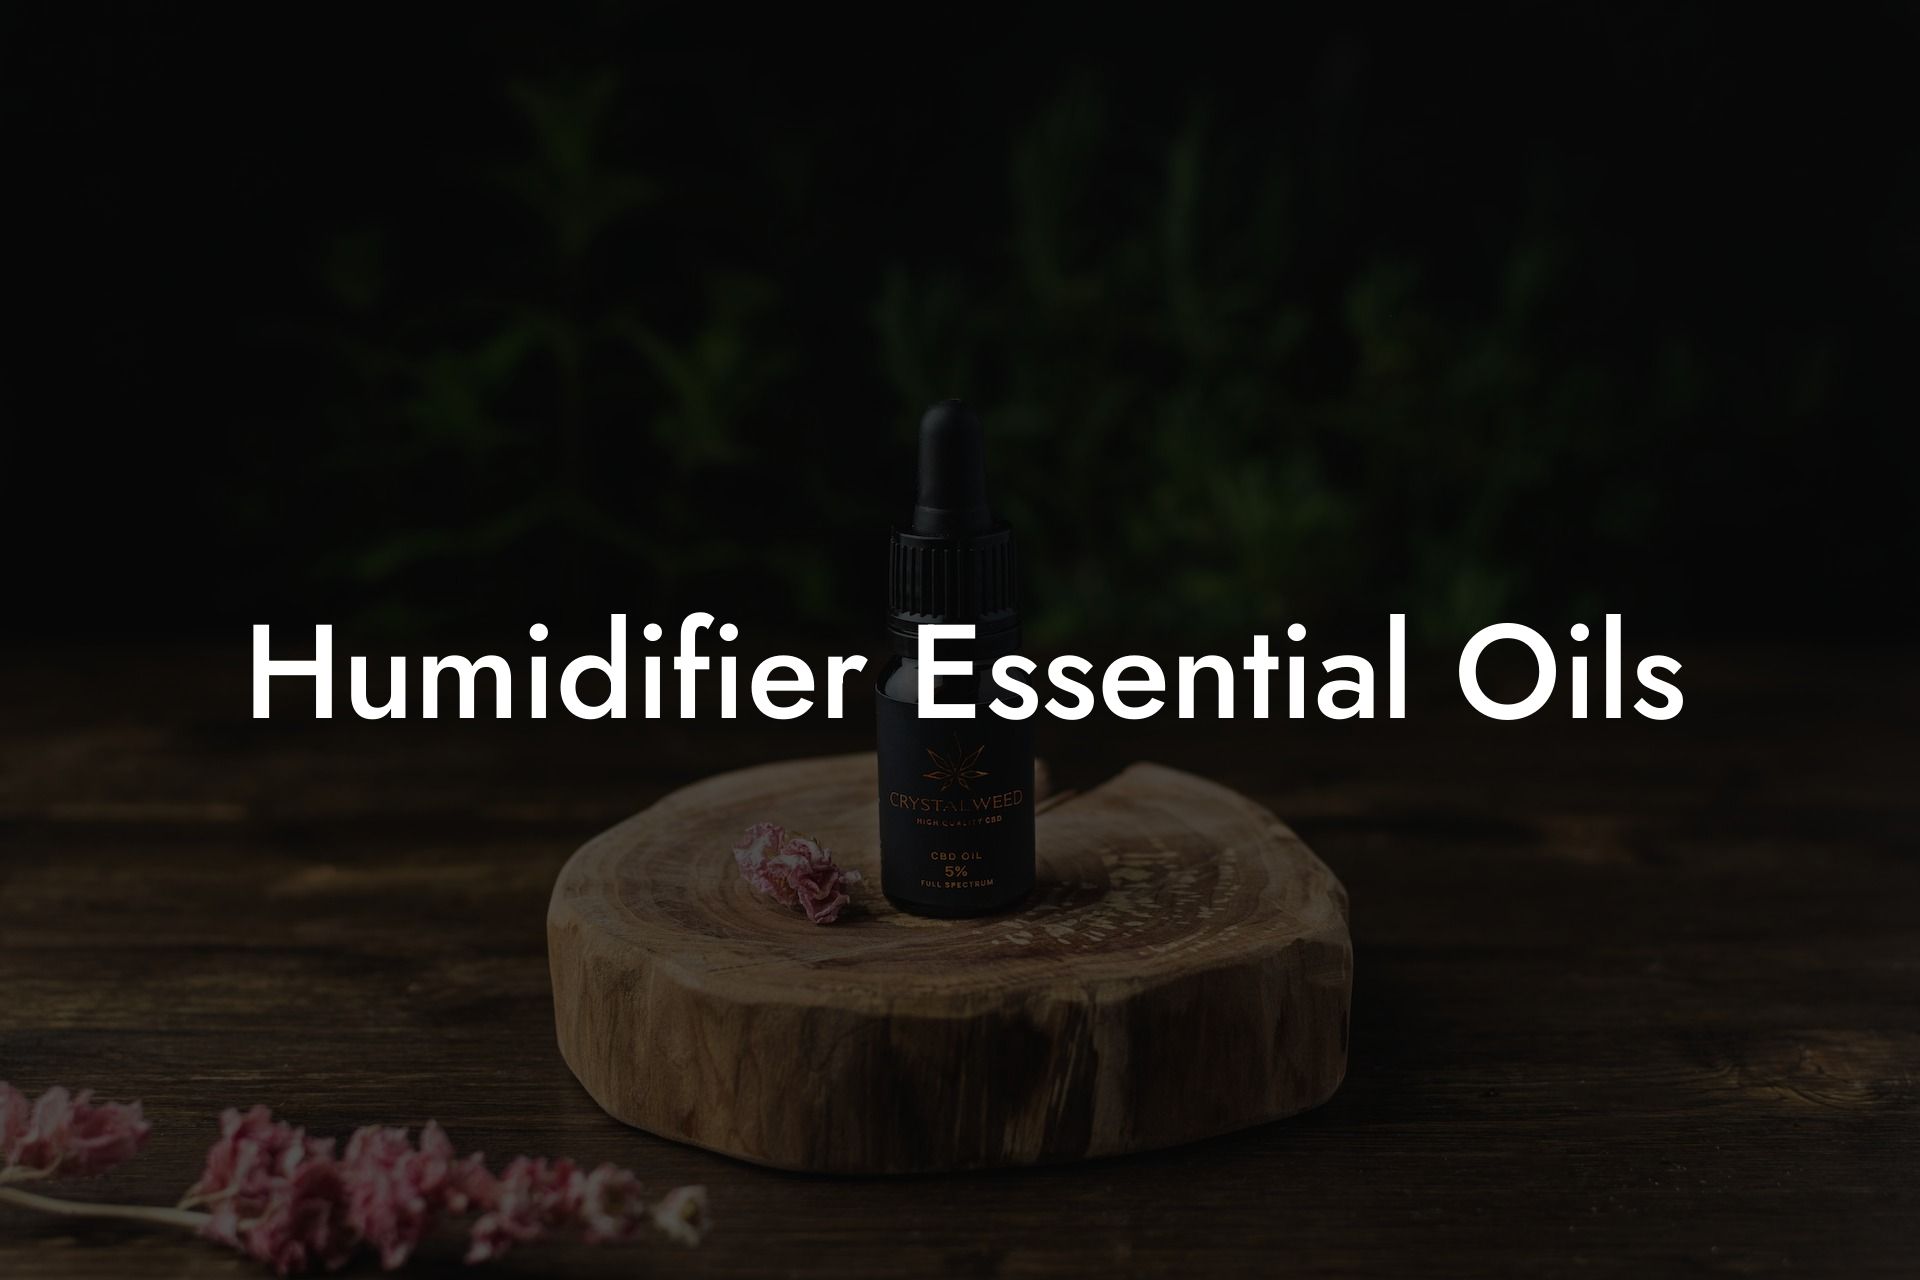 Humidifier Essential Oils